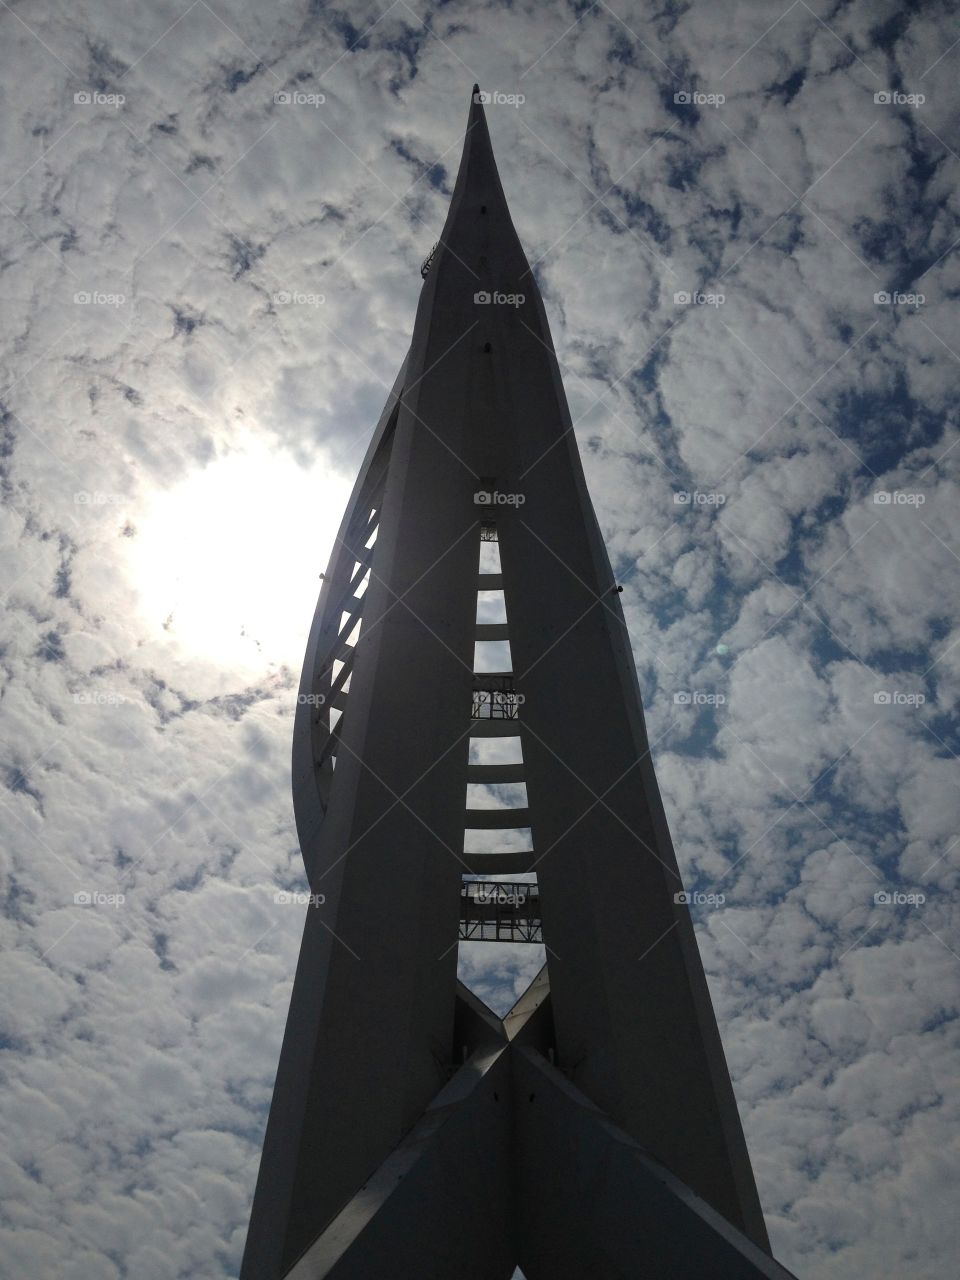 The spinnaker tower 